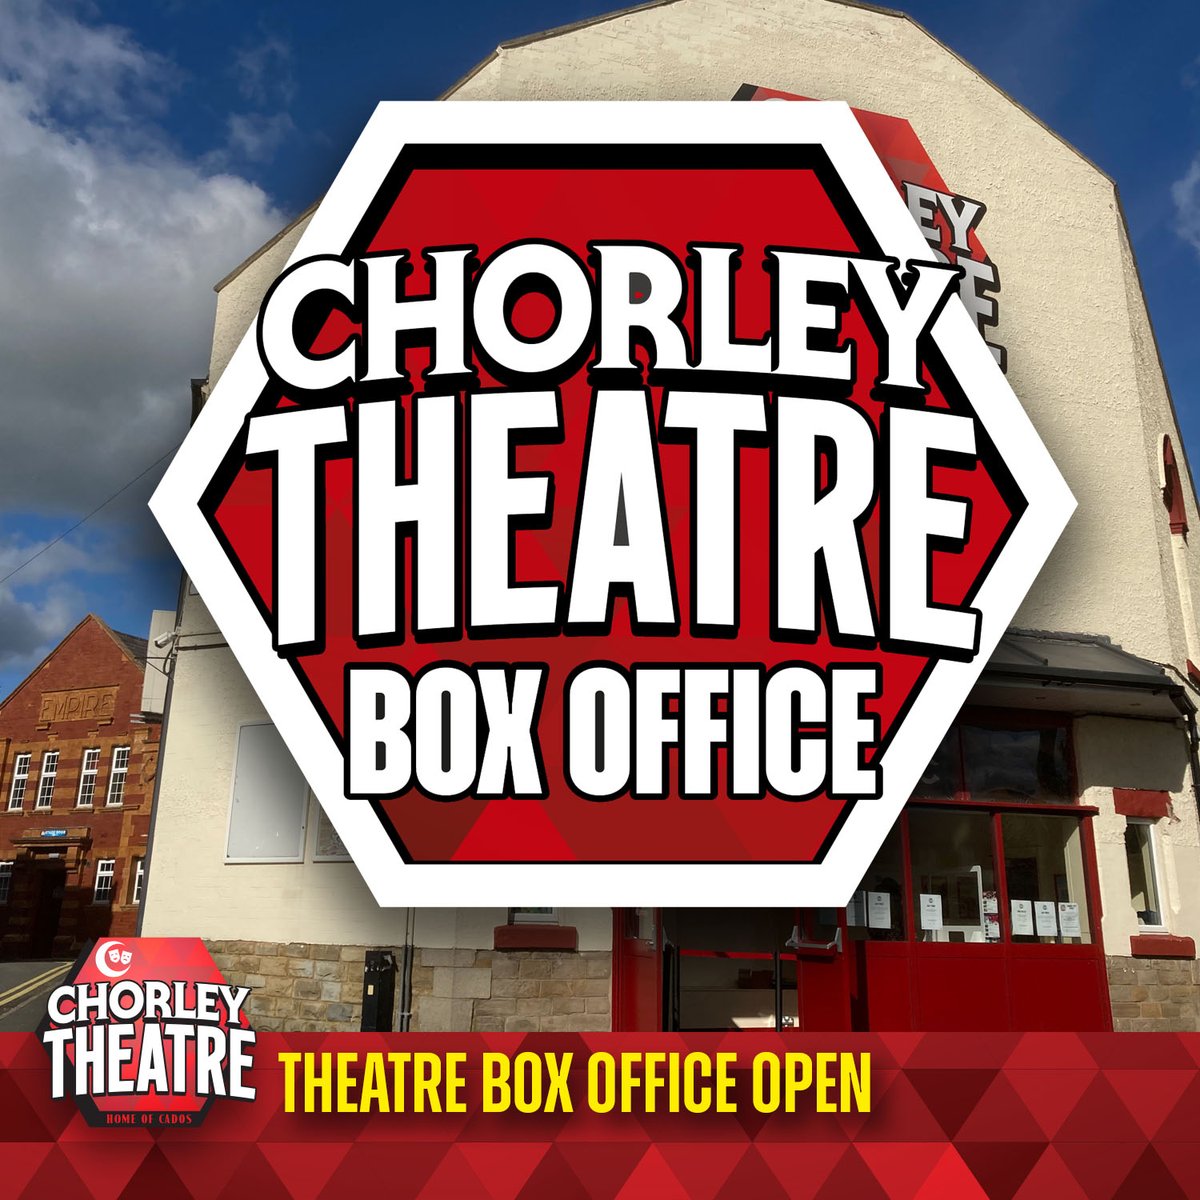 Theatre Box Office will be open this Sunday 11am to 1pm for ticketing needs! The Chorley 10K is on so roads will be closed - so what better time to open up the box office? Call in to save on booking fees for Constellations, Ladies Day and everything else.